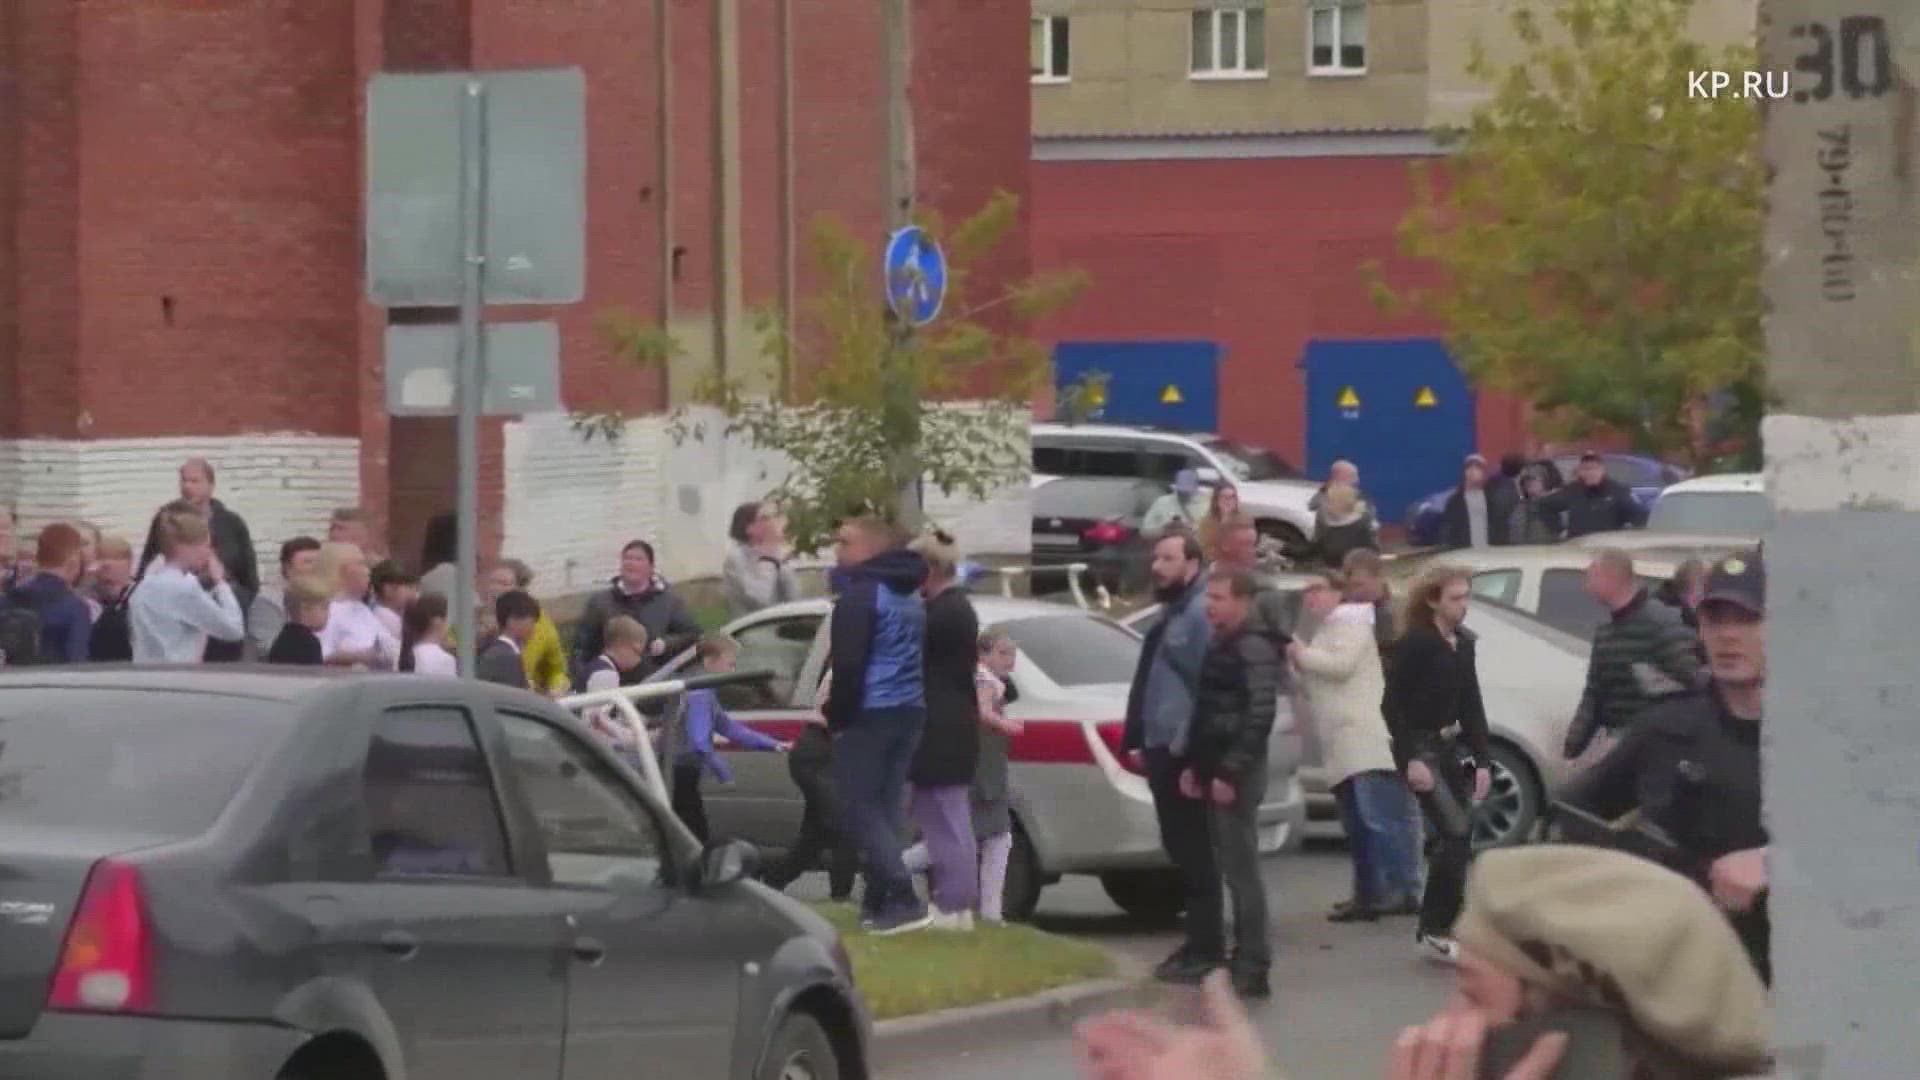 A gunman killed at least 17 people at a school in Russia today, 11 of them children.